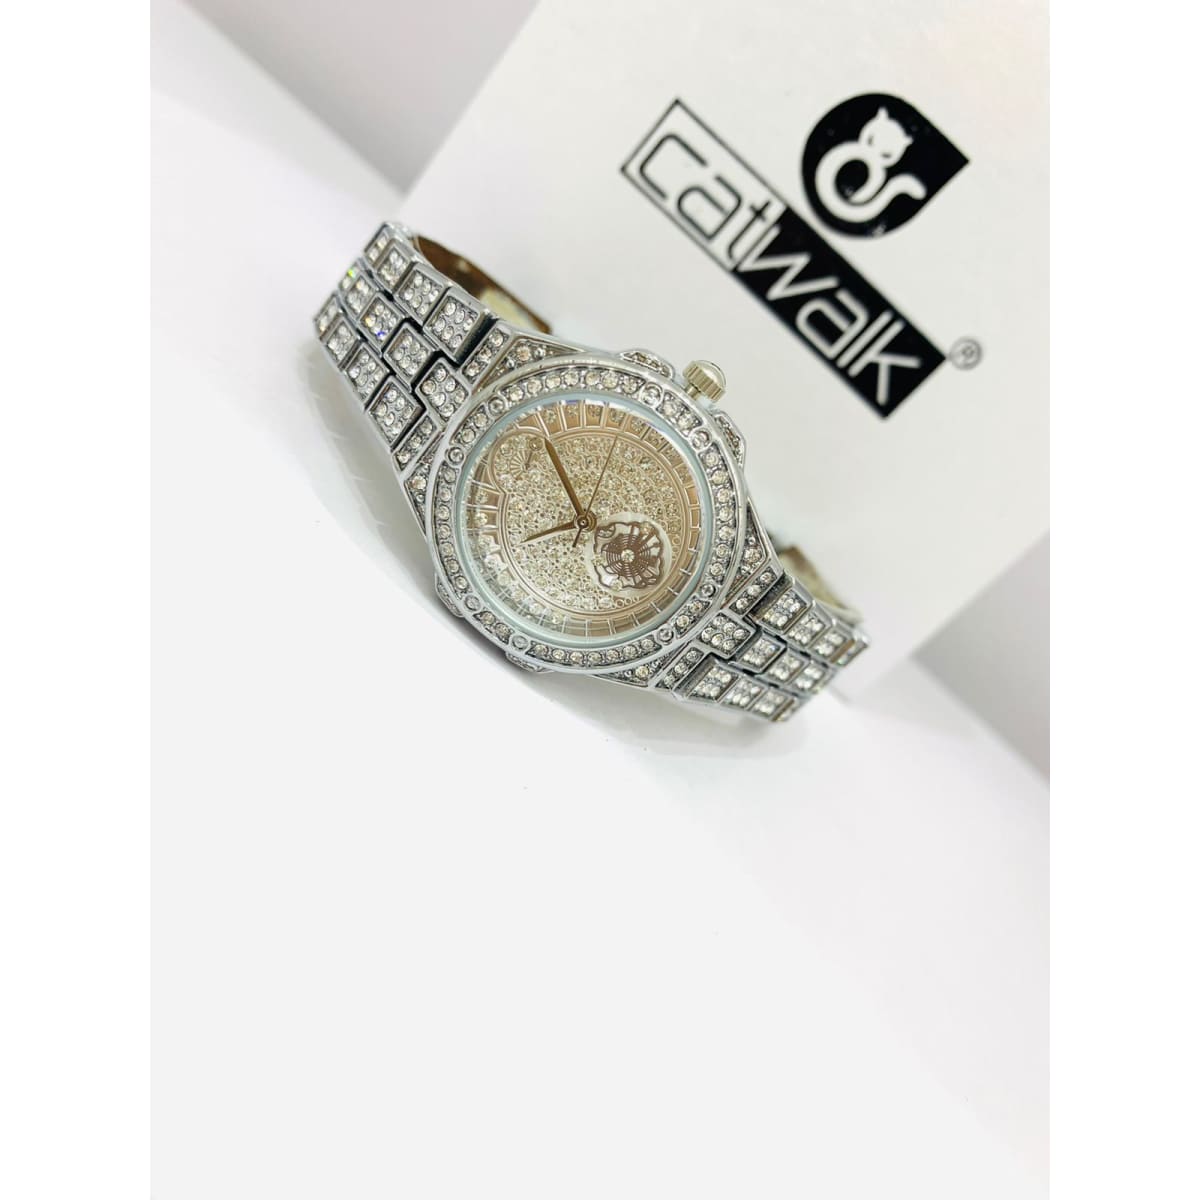 Catwalk CW2022/3 Fashionable Cz Stone Covered Analog Stainless Watch for Women with Gift Box Shop